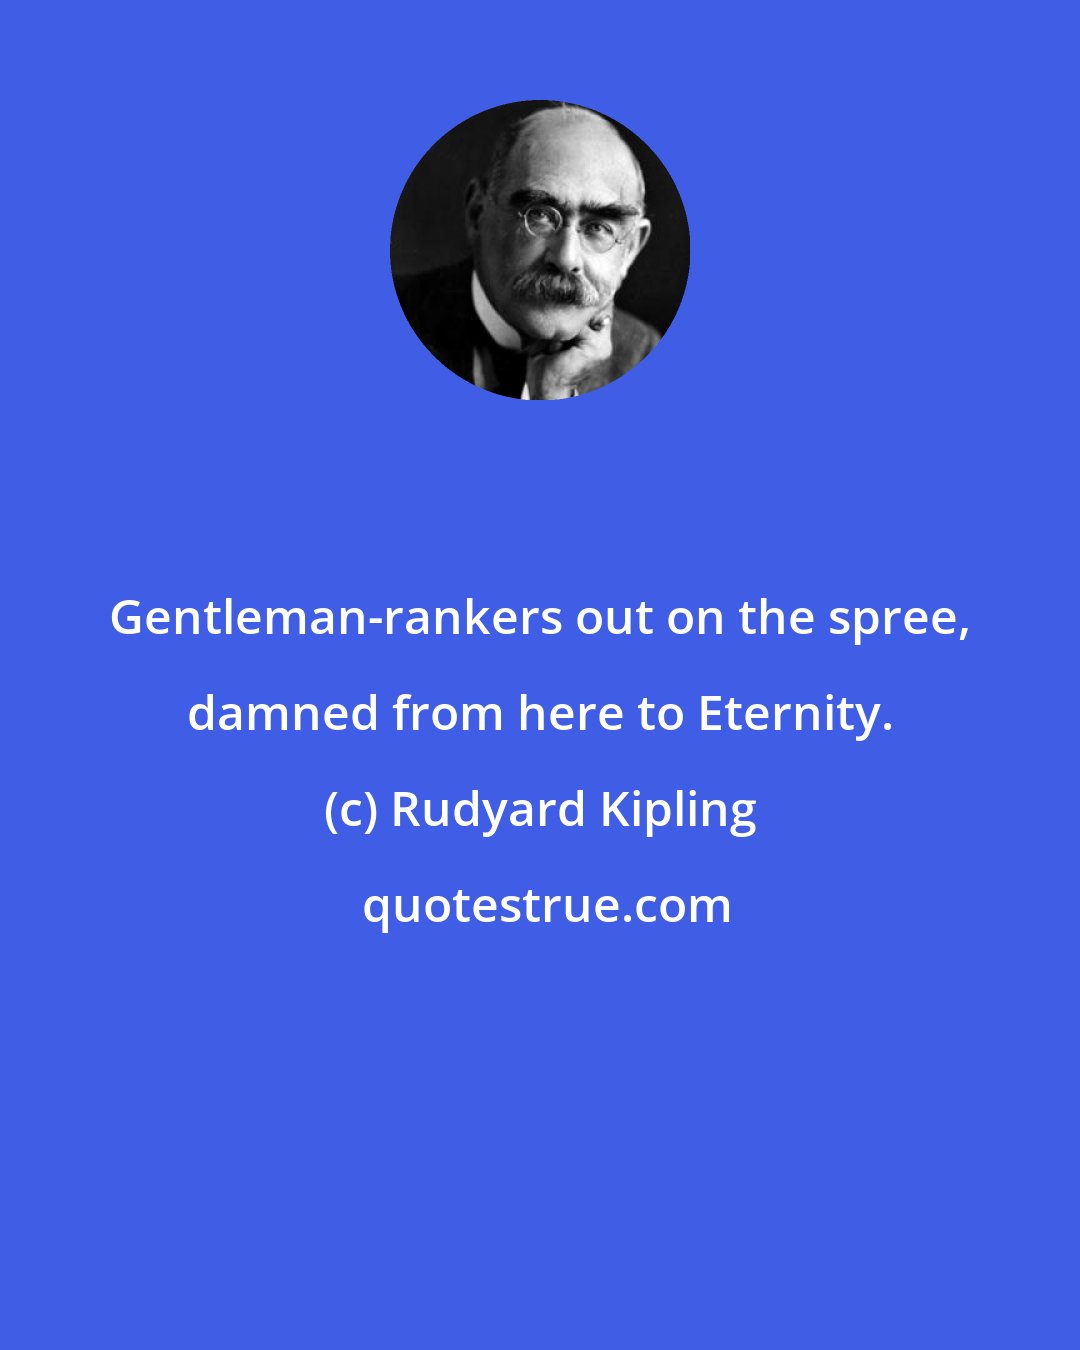 Rudyard Kipling: Gentleman-rankers out on the spree, damned from here to Eternity.